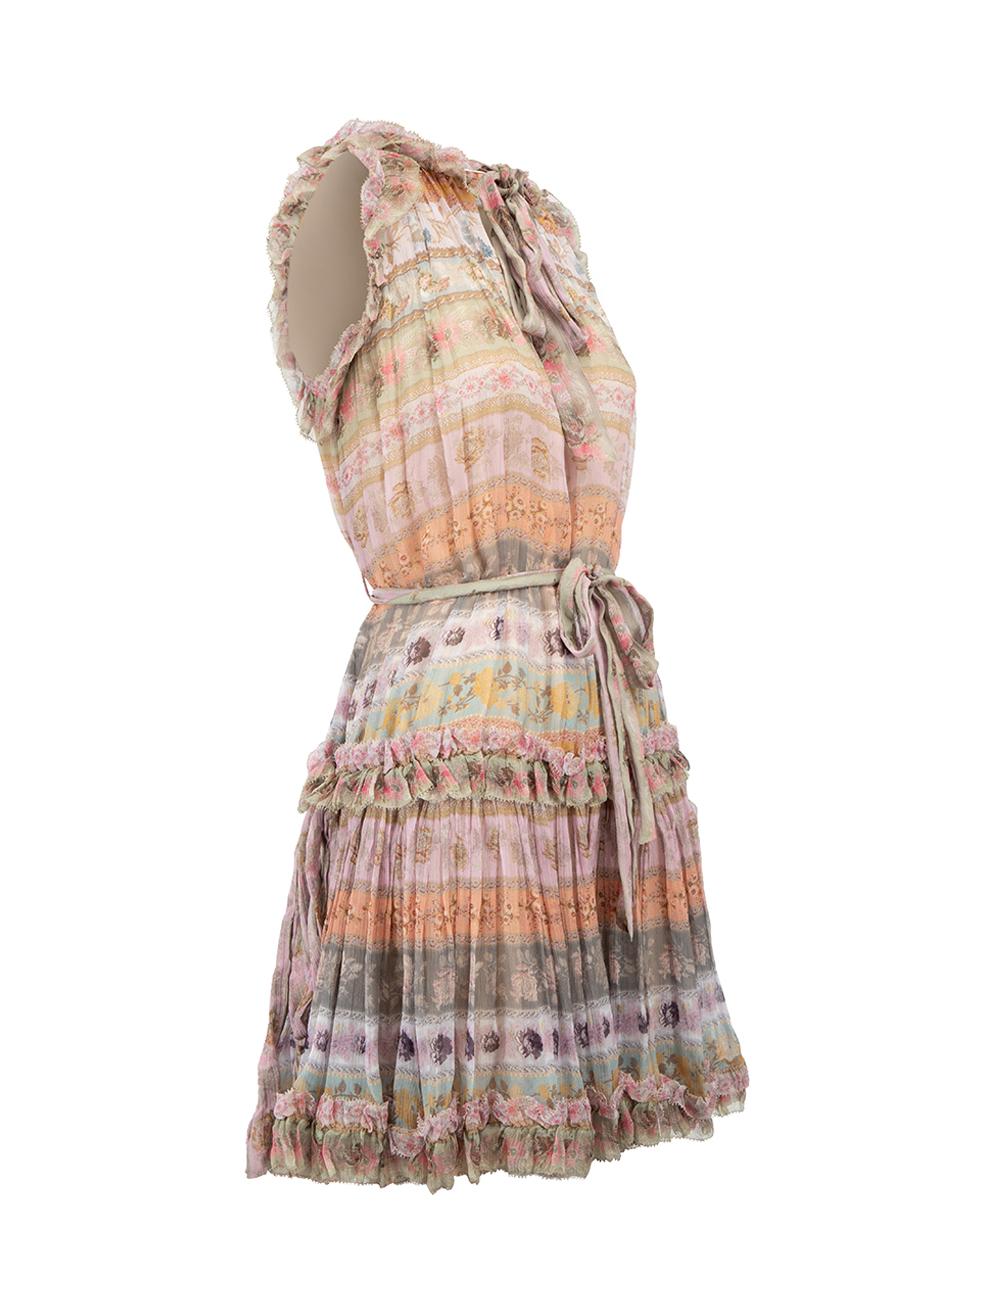 CONDITION is Very good. Minimal wear to dress is evident. Minimal wear to the neckline fastening with missing top button on this used Zimmermann designer resale item.



Details


Multicolour

Silk

Mini dress

Slightly see through

Floral print